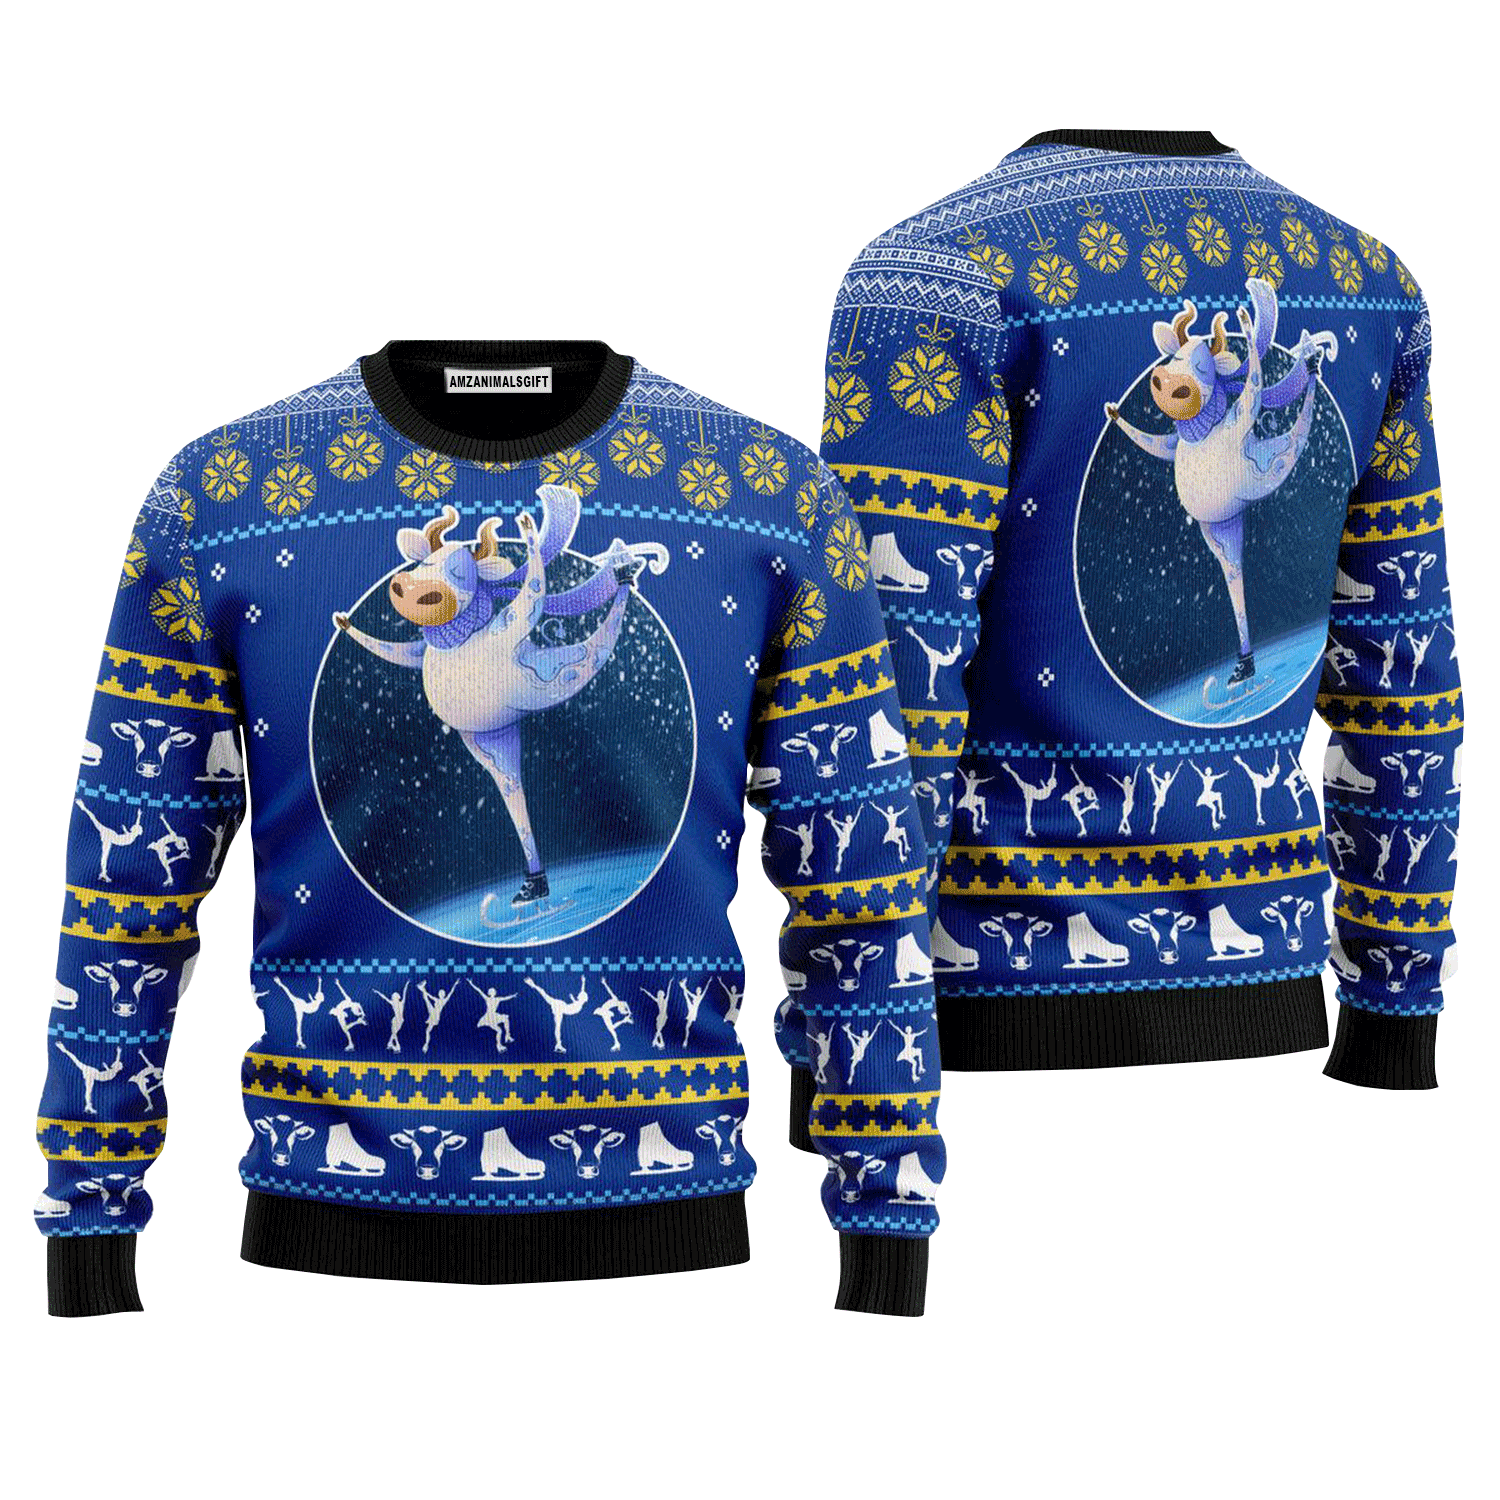 Cows Ice Skating Ugly Christmas Sweater, Ugly Sweater For Men & Women, Perfect Outfit For Christmas New Year Autumn Winter